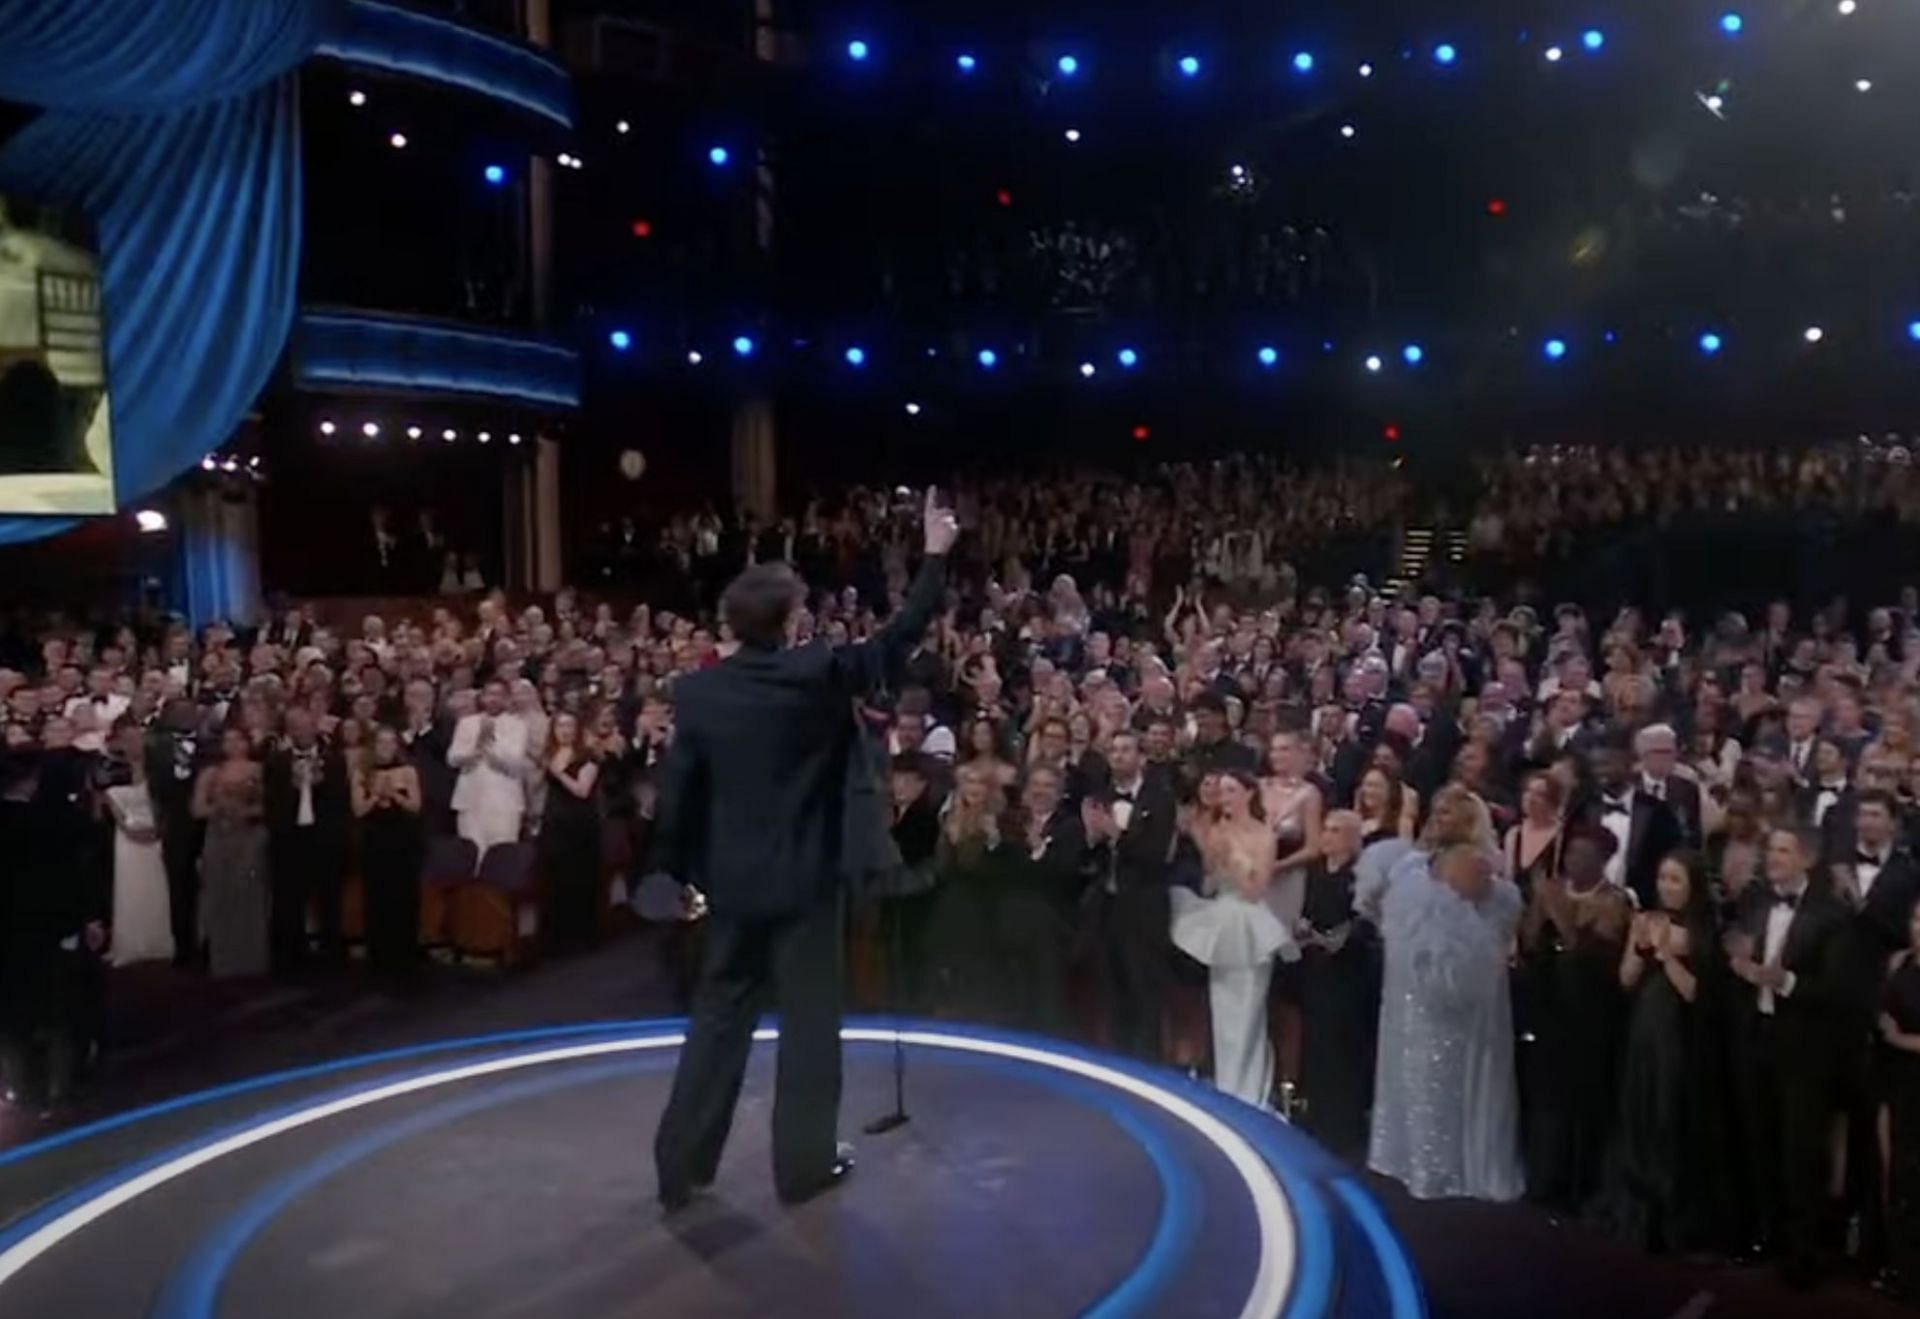 Robert Downey Jr receives a standing ovation from the audience at Oscars 2024. (Image via ABC)